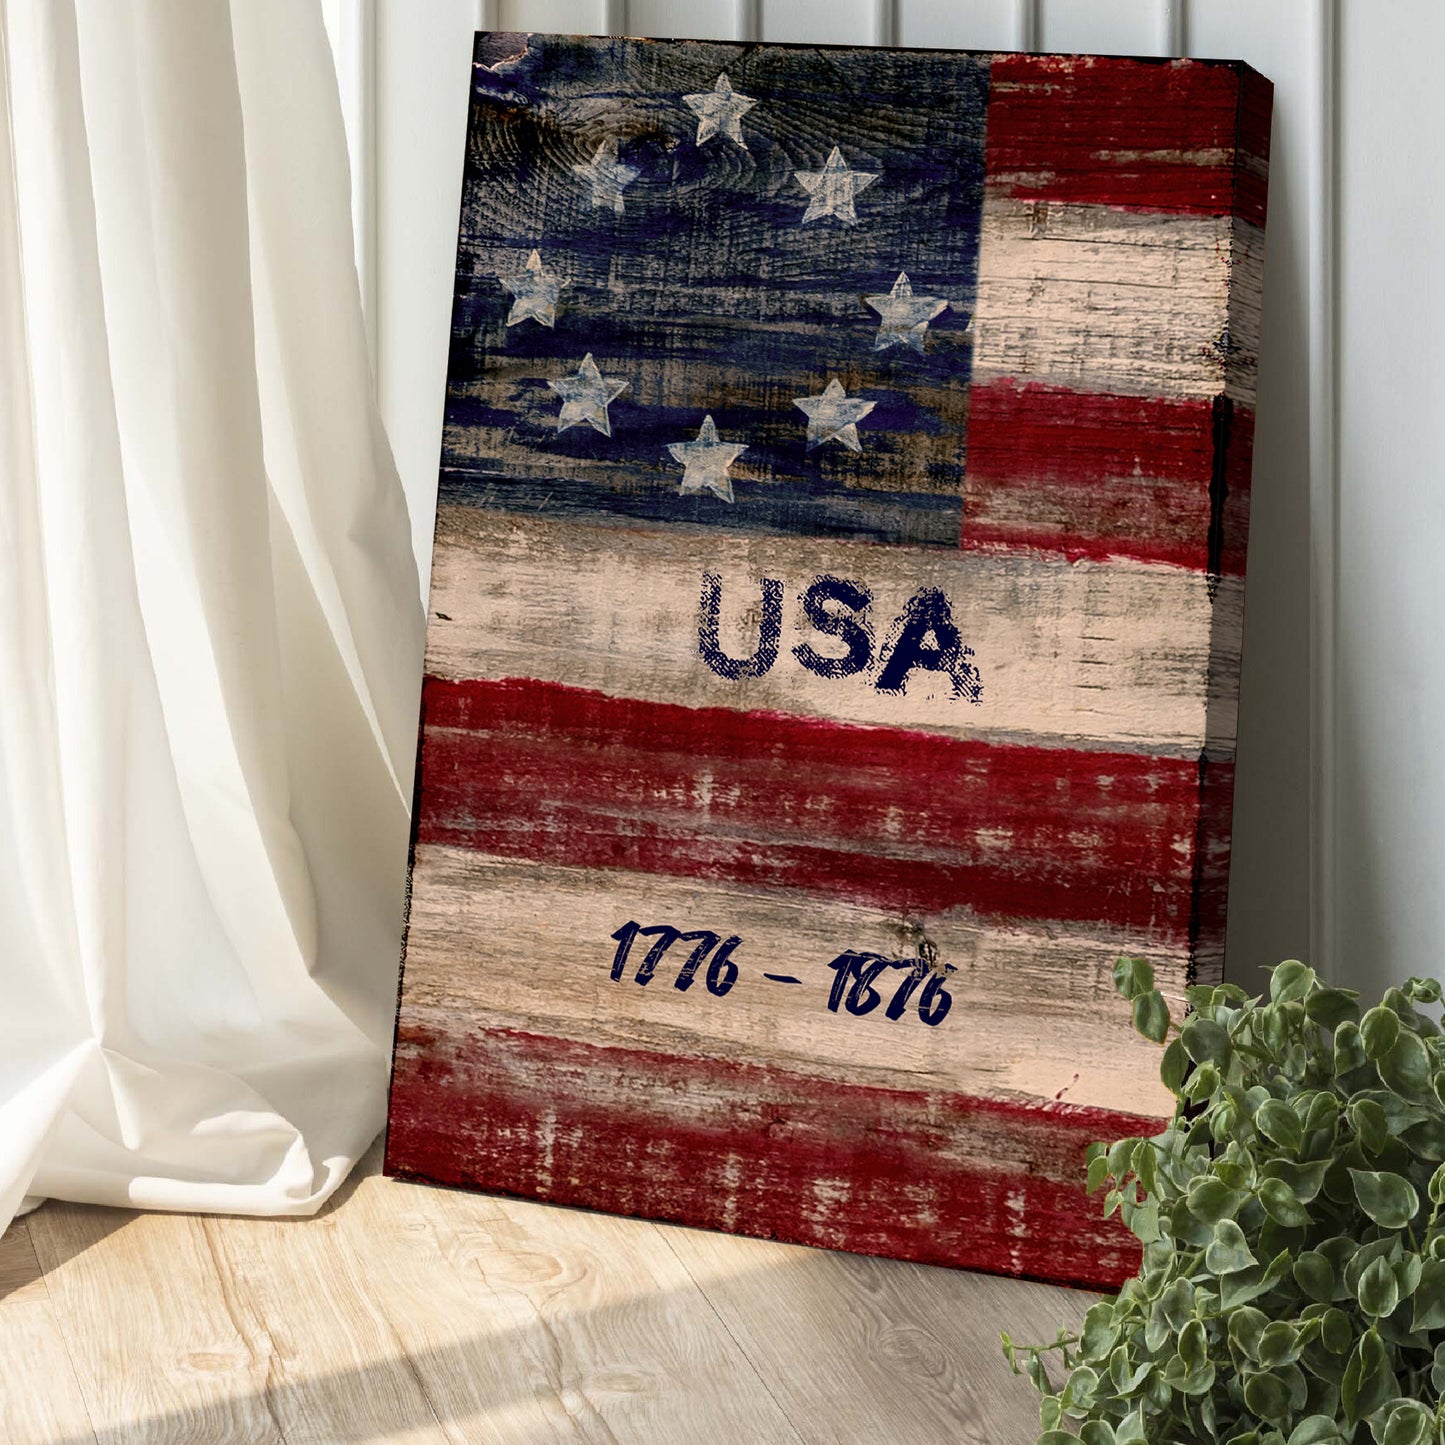 USA 1776-1876 Sign Style 1 - Image by Tailored Canvases